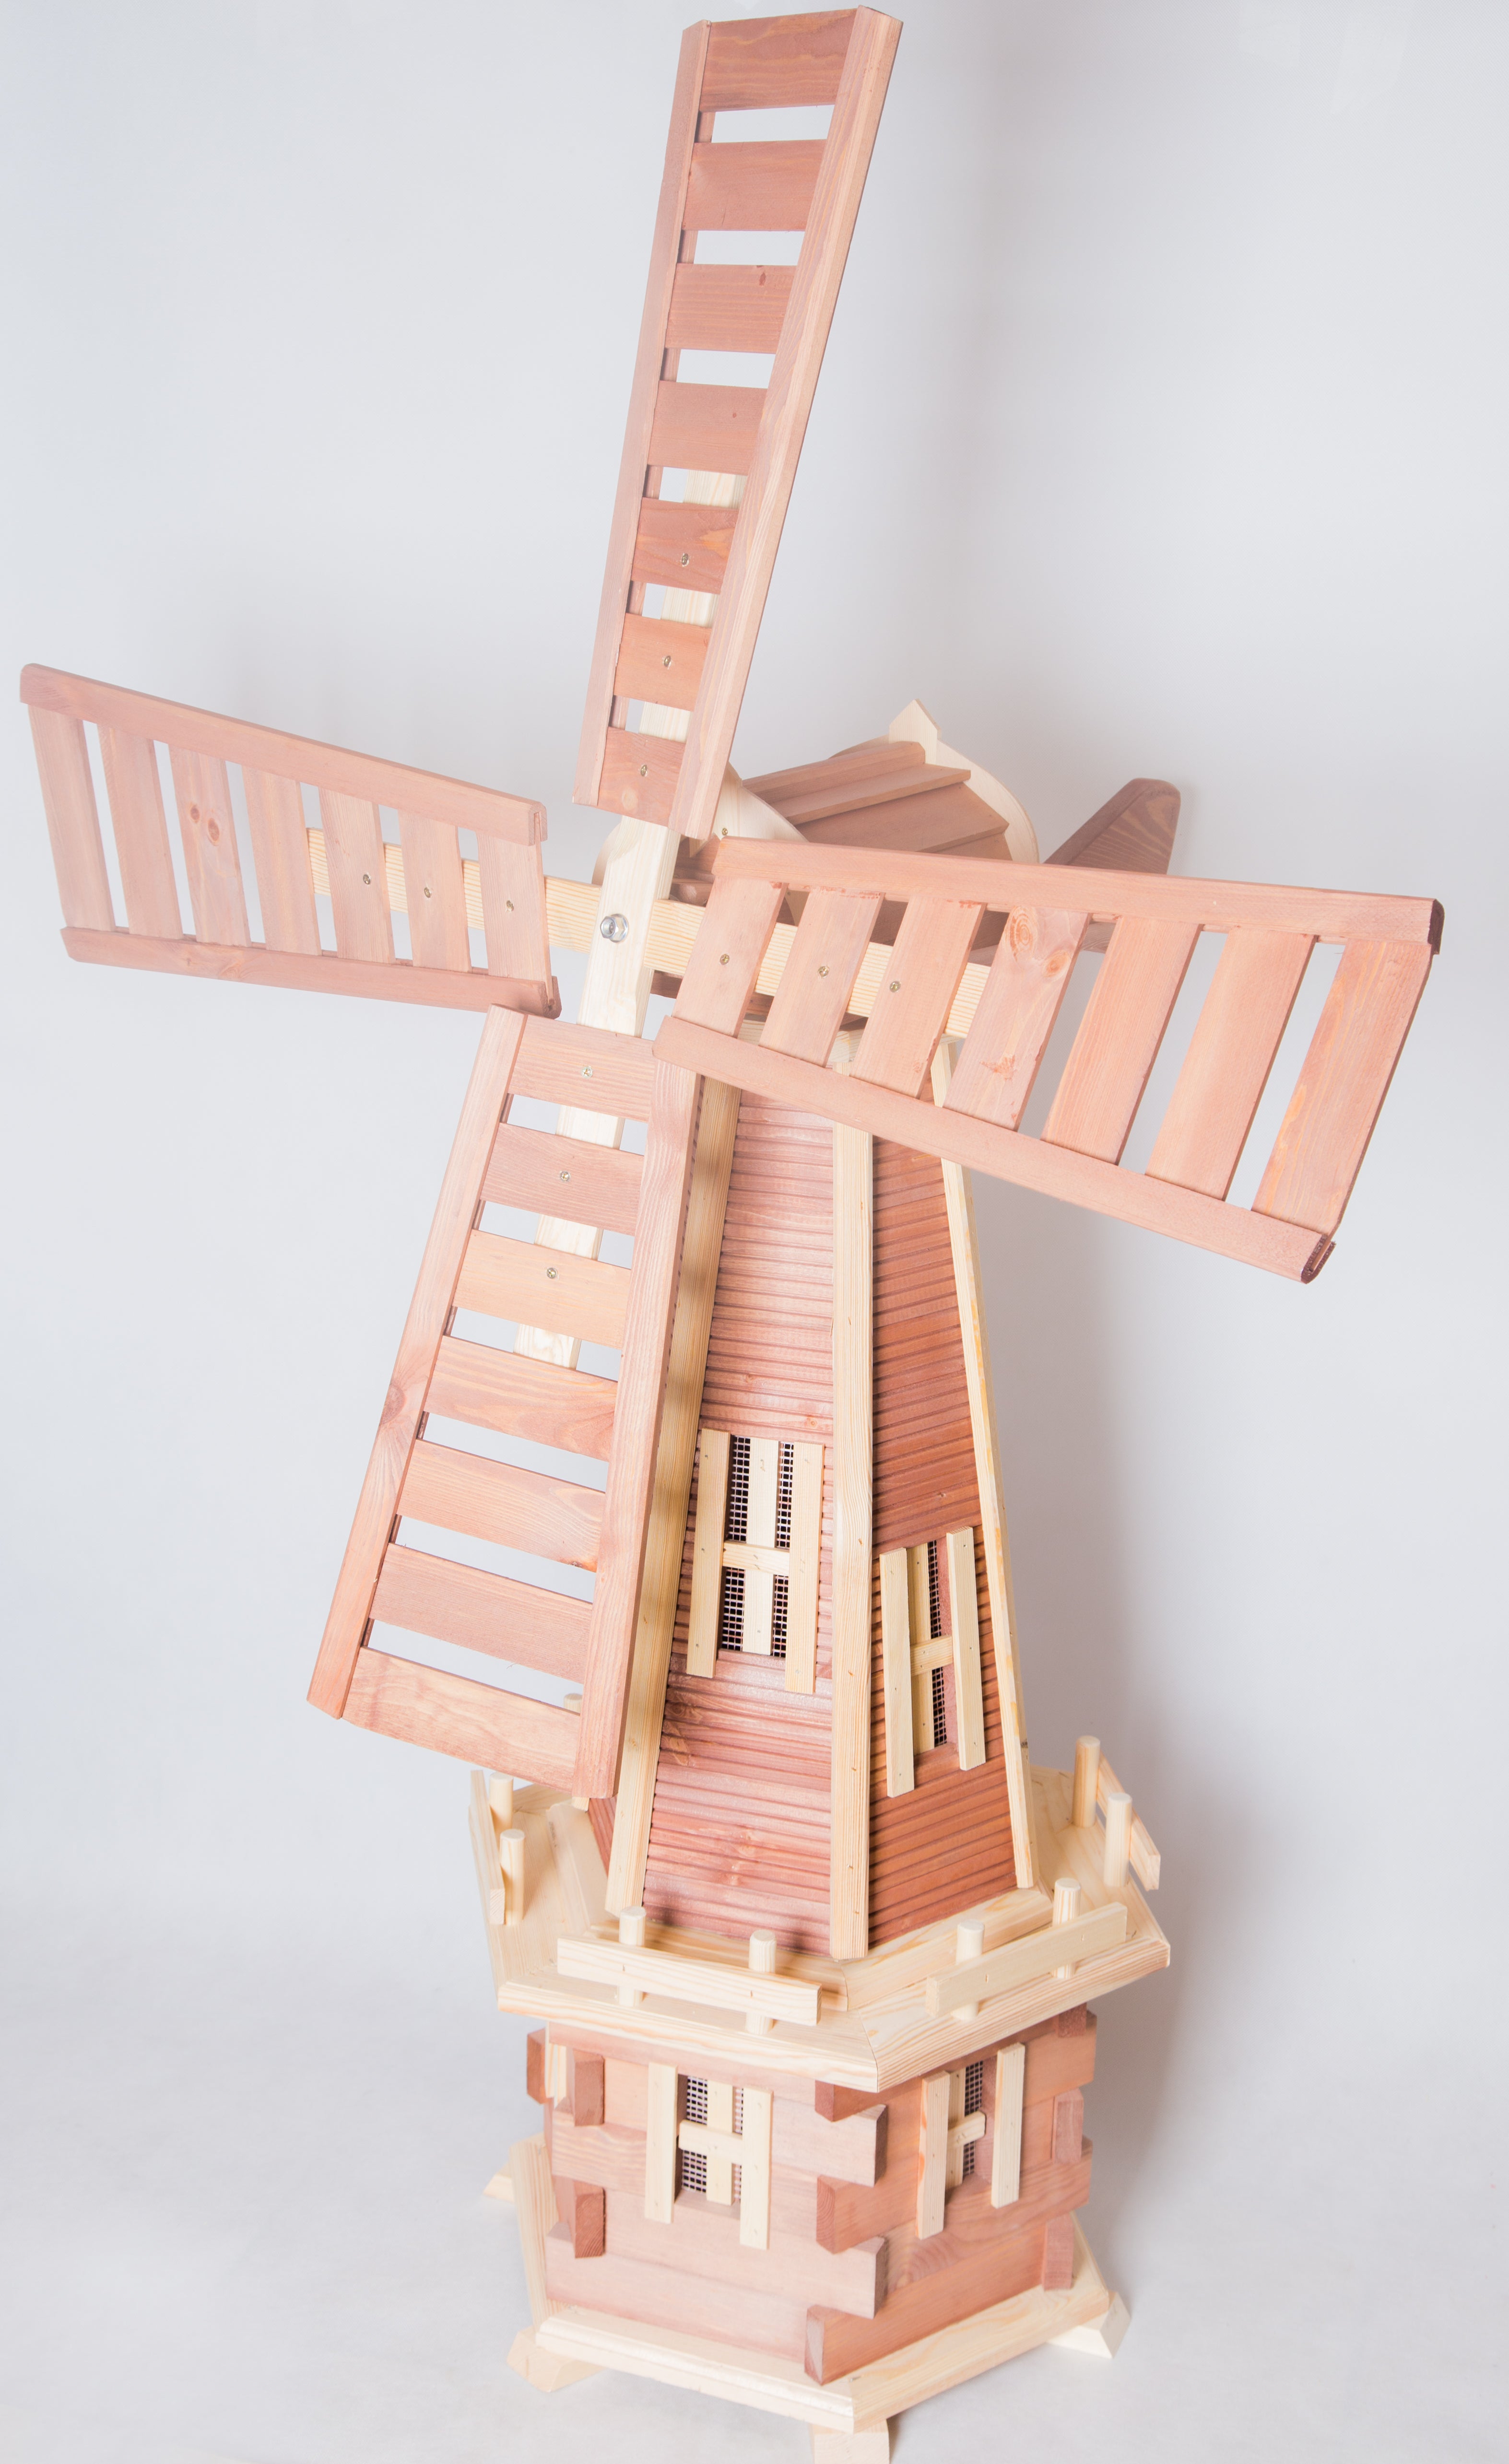 Image: A wooden garden windmill with four blades, standing gracefully in a lush garden. The natural wood texture and intricate craftsmanship add rustic charm to the landscape